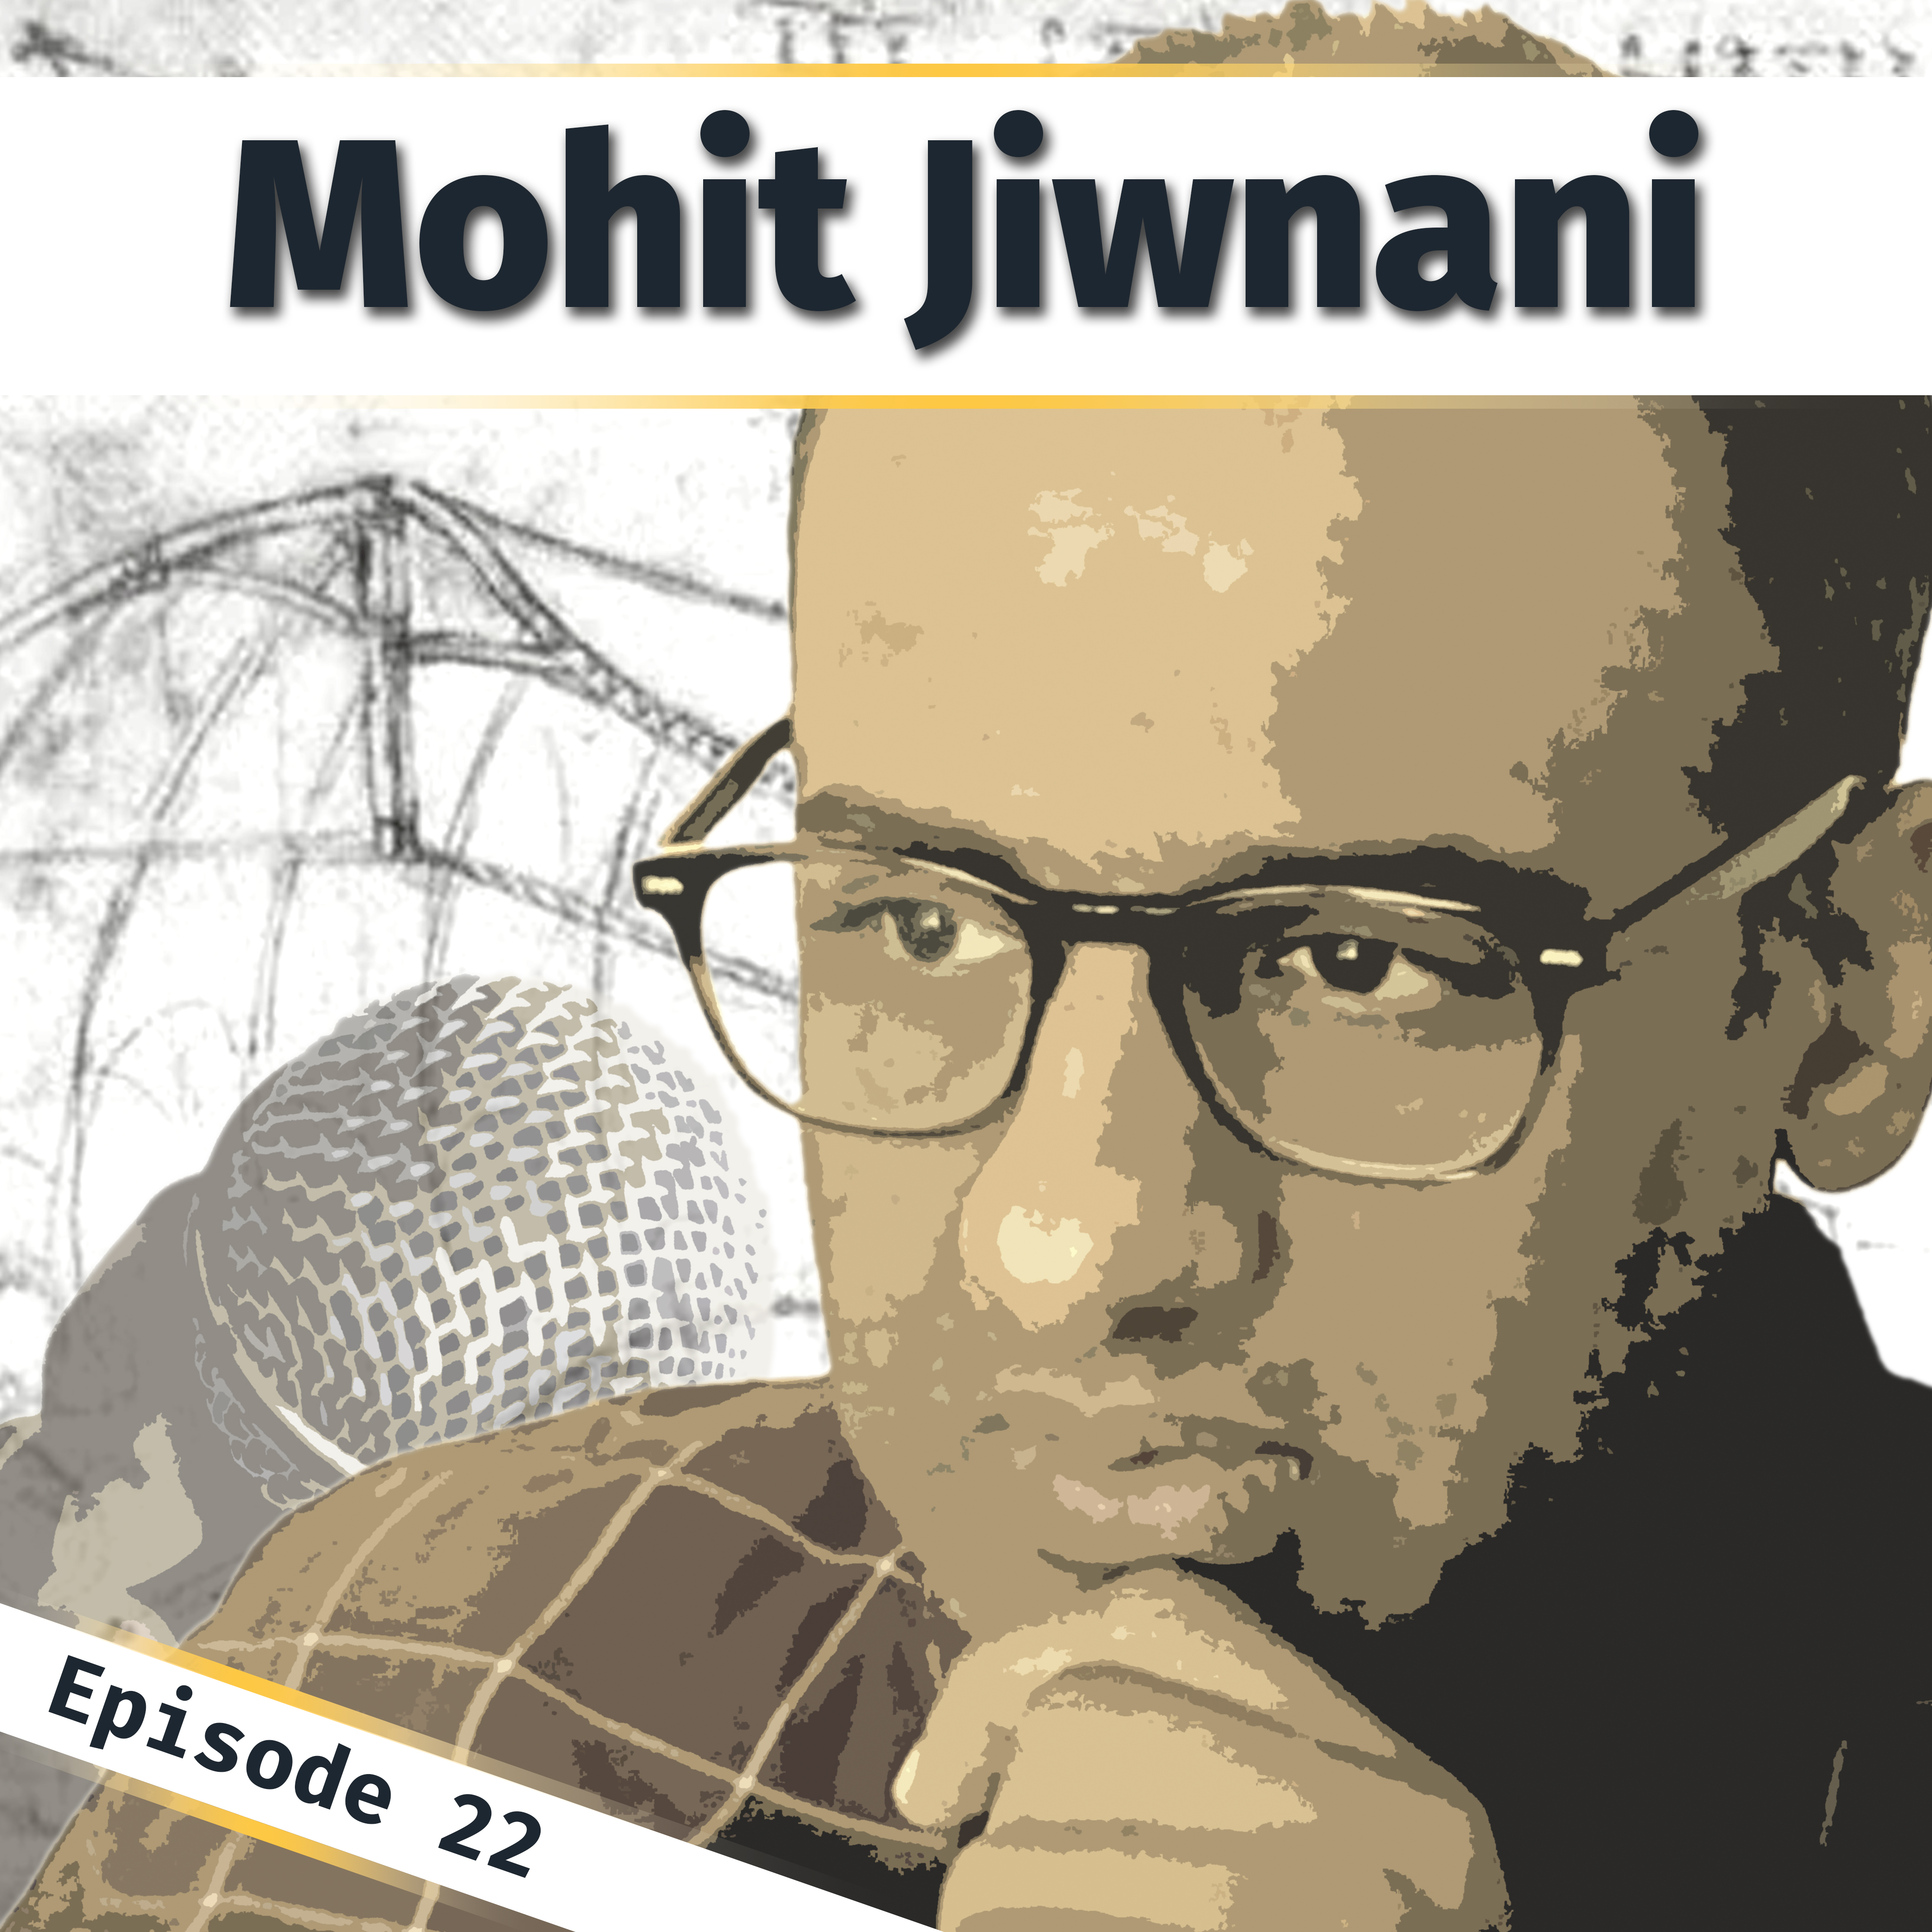 A poster image for Innovation Bound podcast episode 22 with Mohit Jiwnani